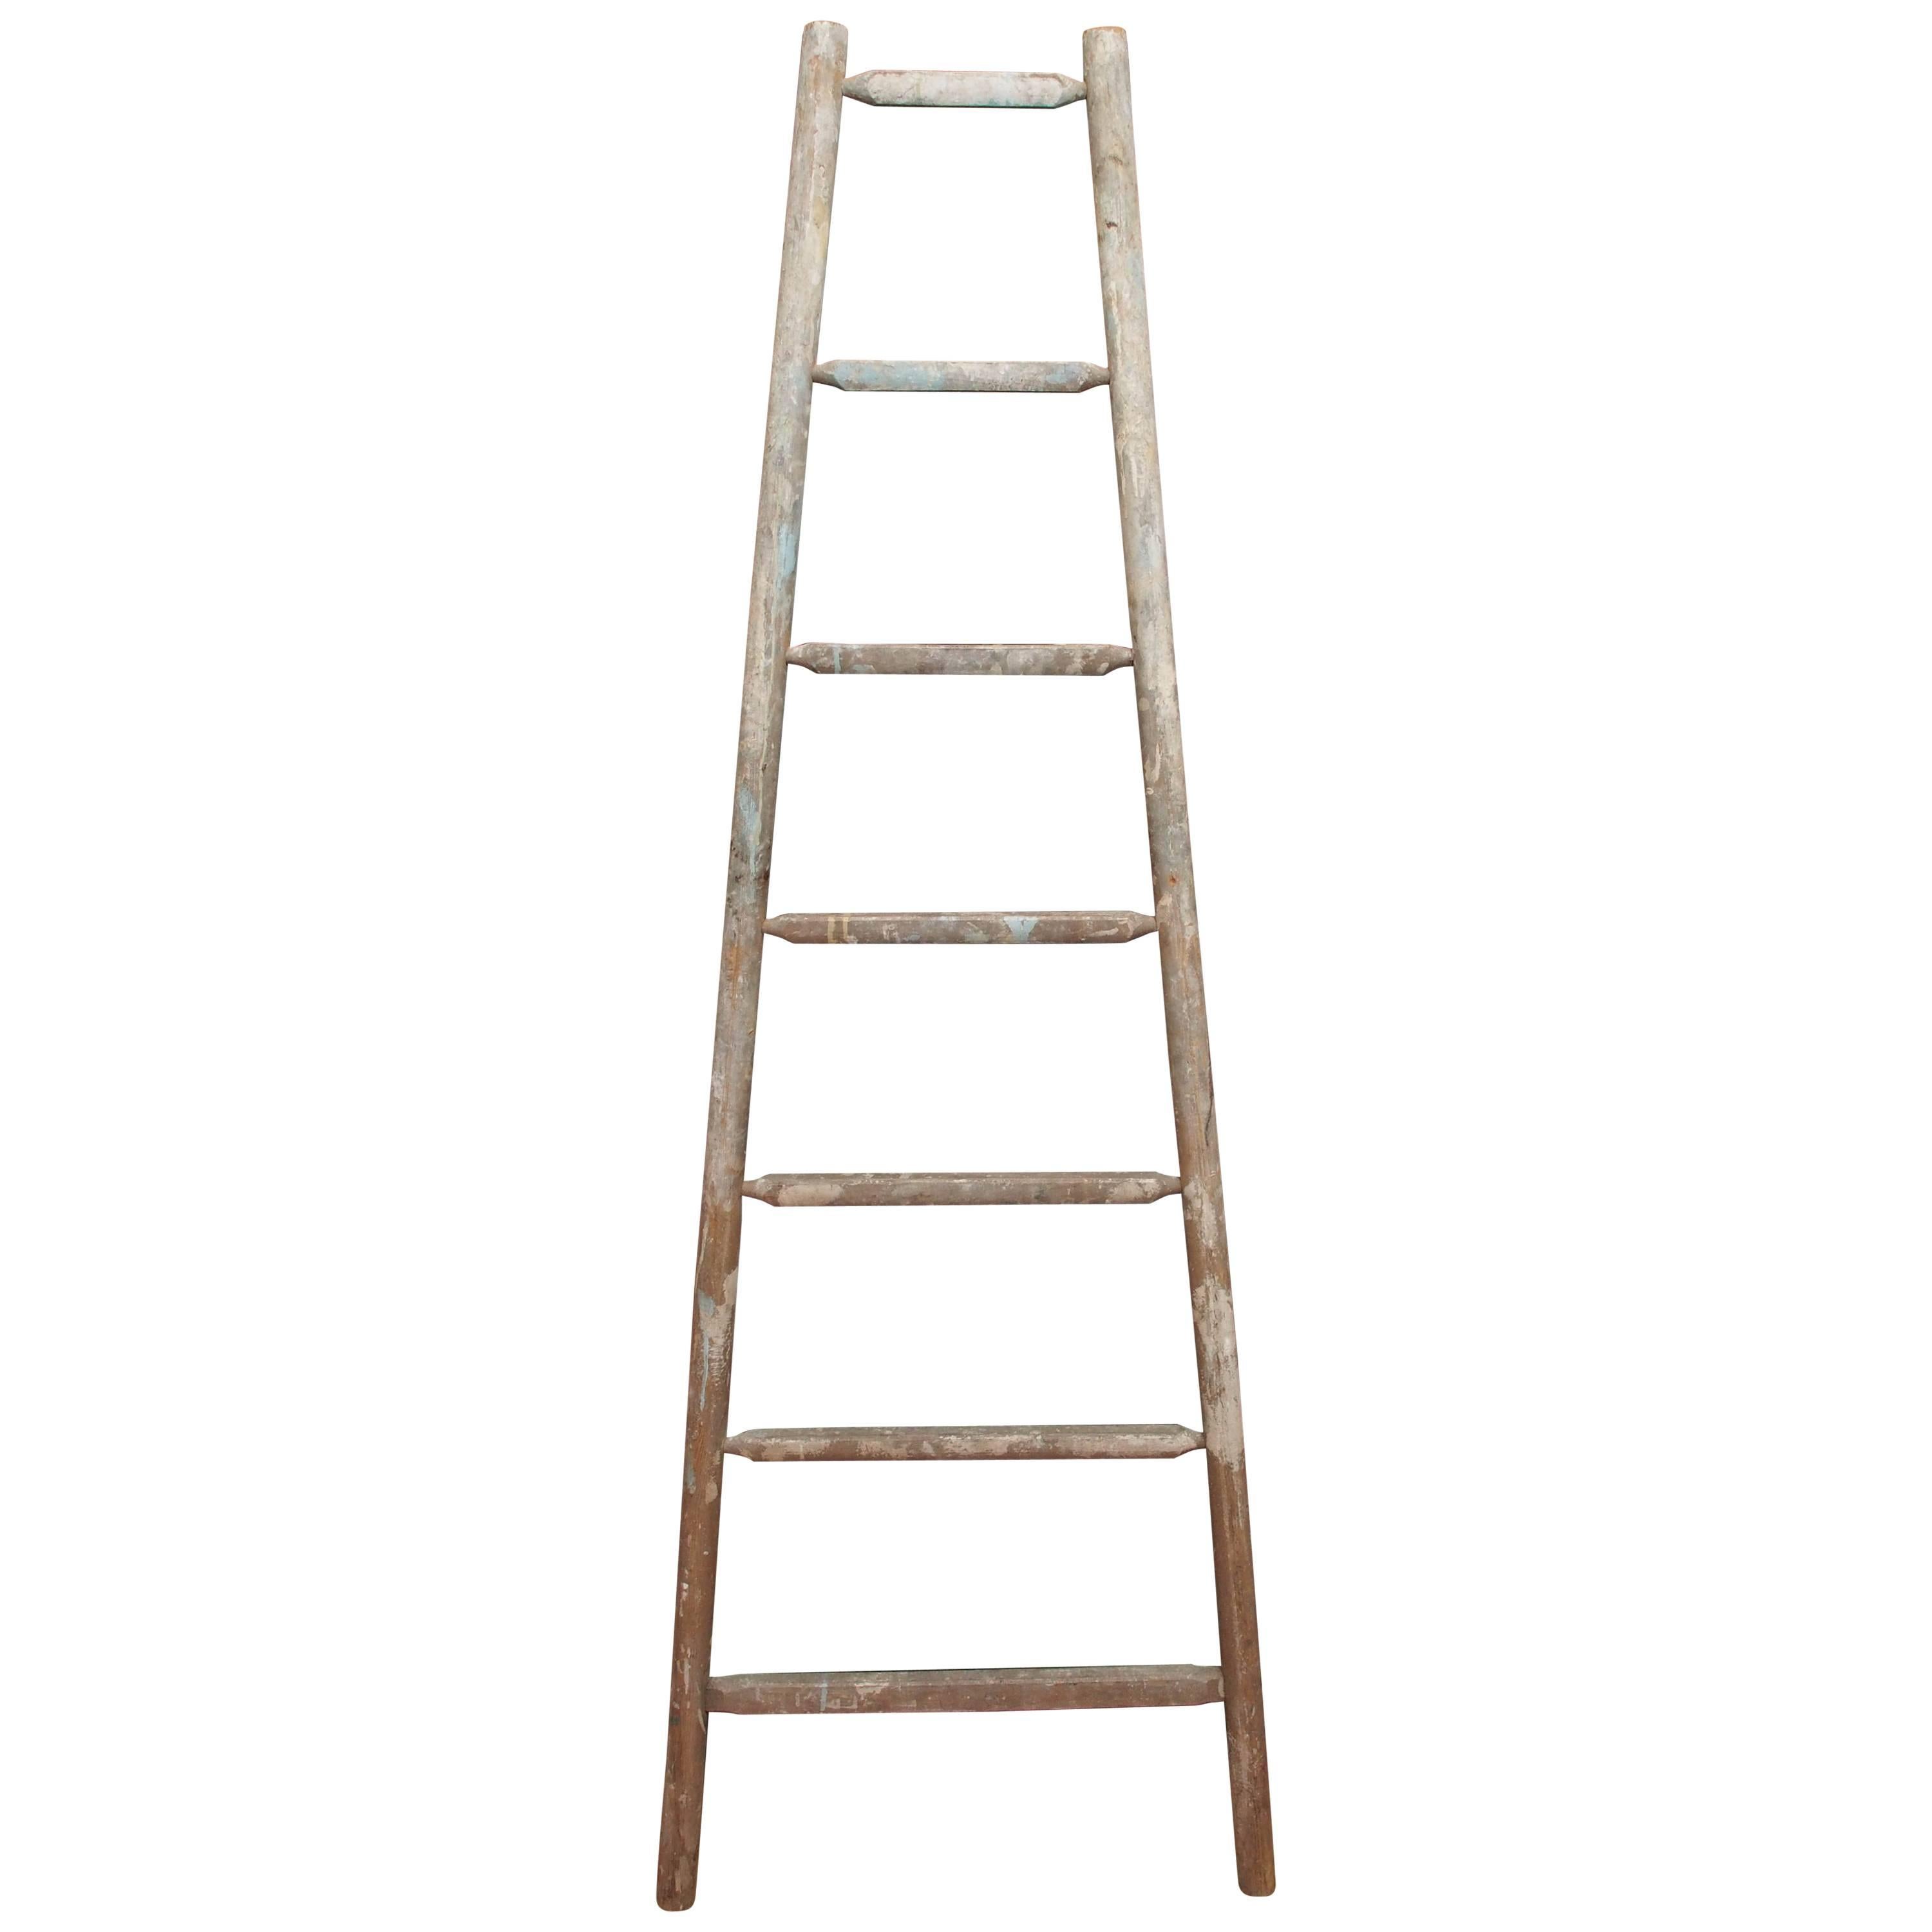 English Orchard Ladder For Sale